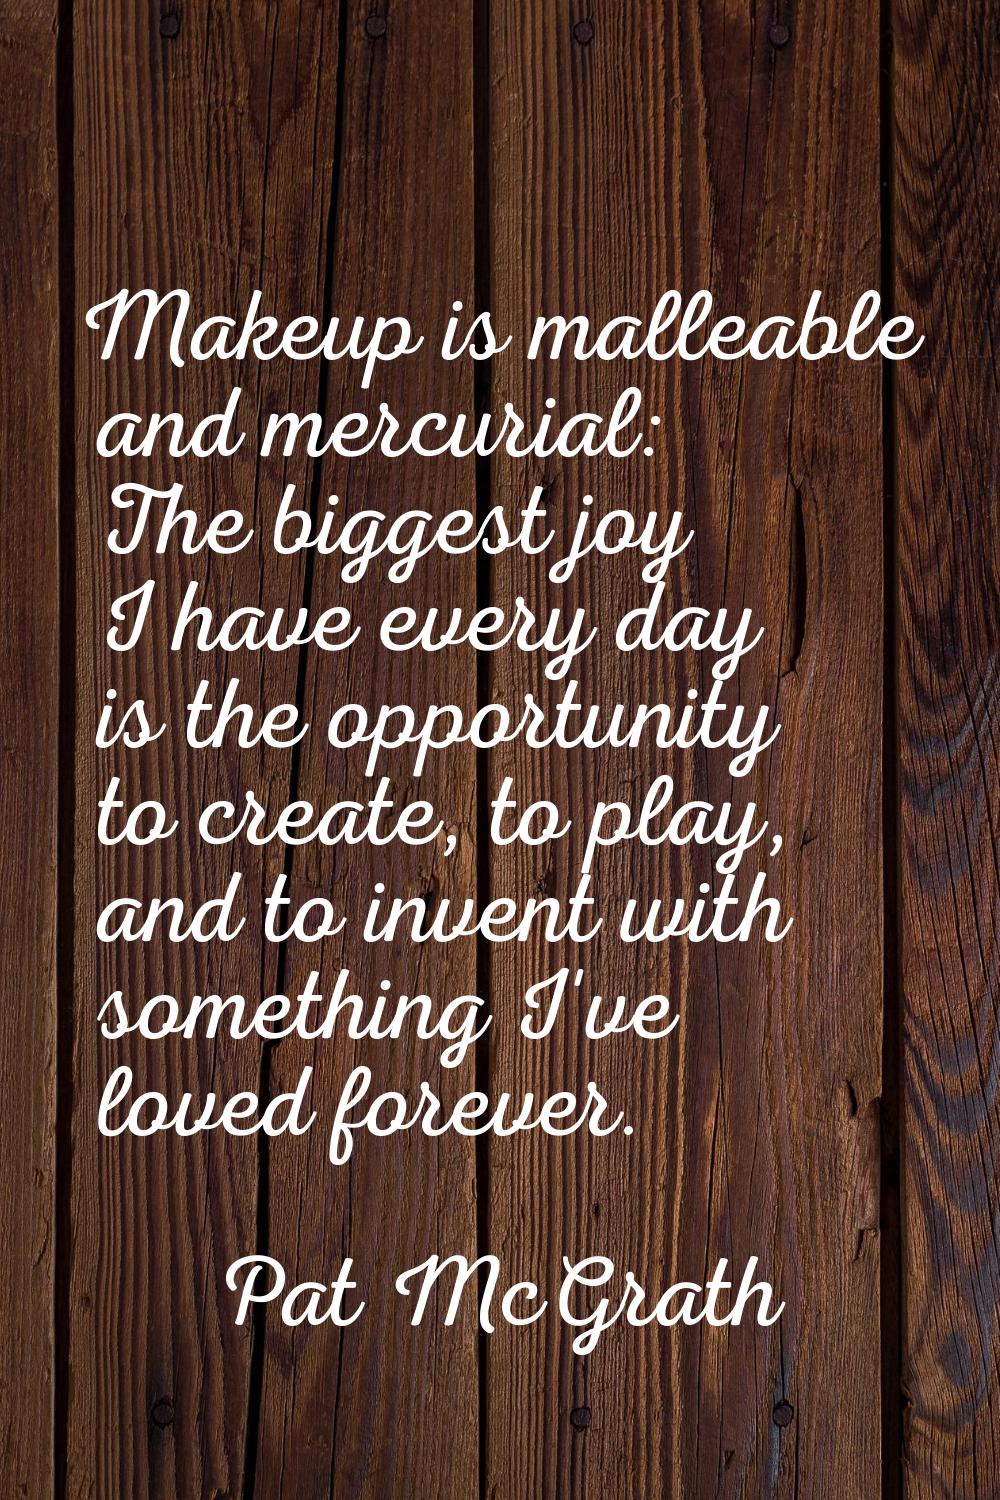 Makeup is malleable and mercurial: The biggest joy I have every day is the opportunity to create, t